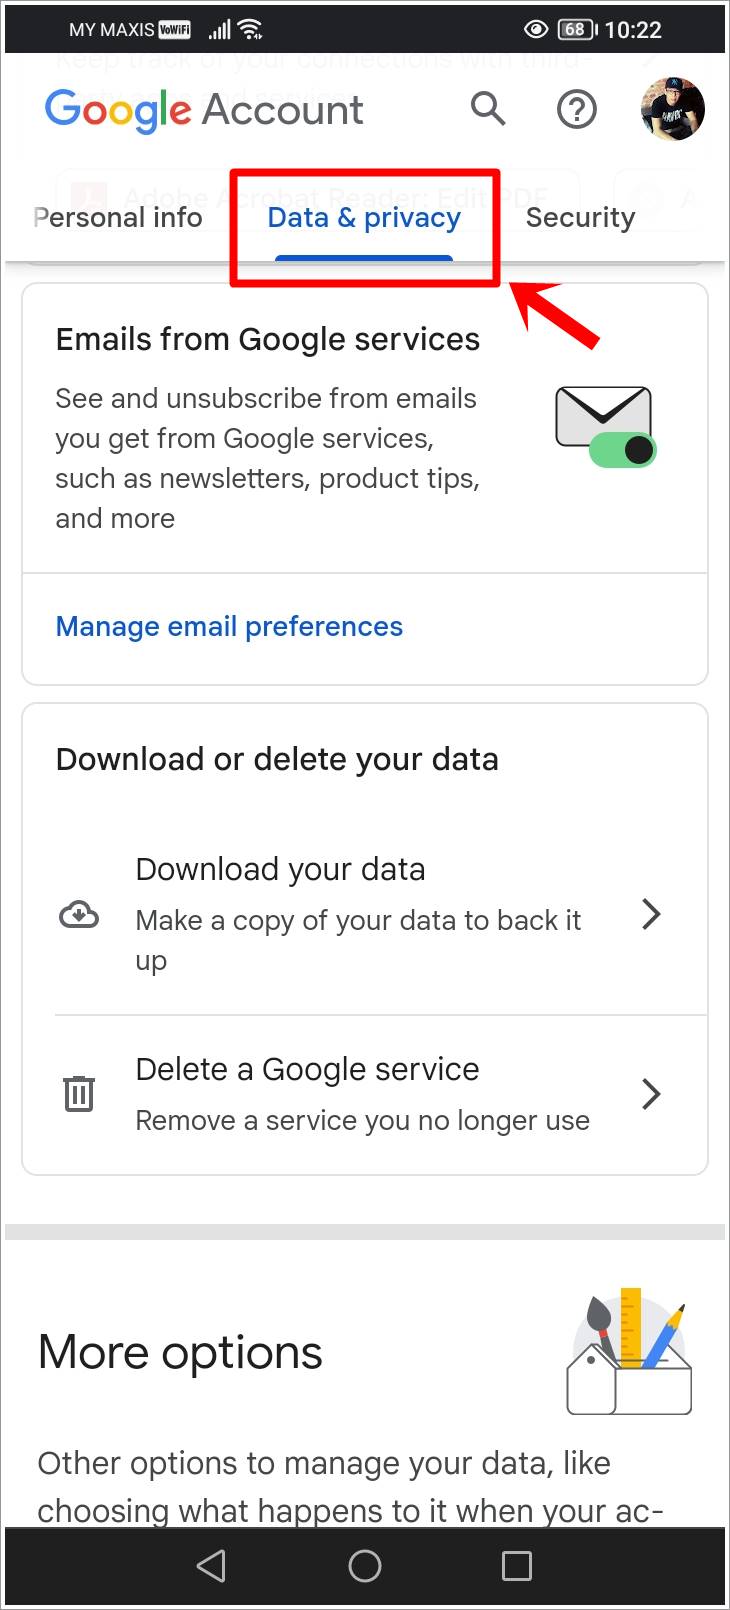 This screenshot captures the home page of the Google Account on a mobile device, with the 'Data & Privacy' option in the menu highlighted.